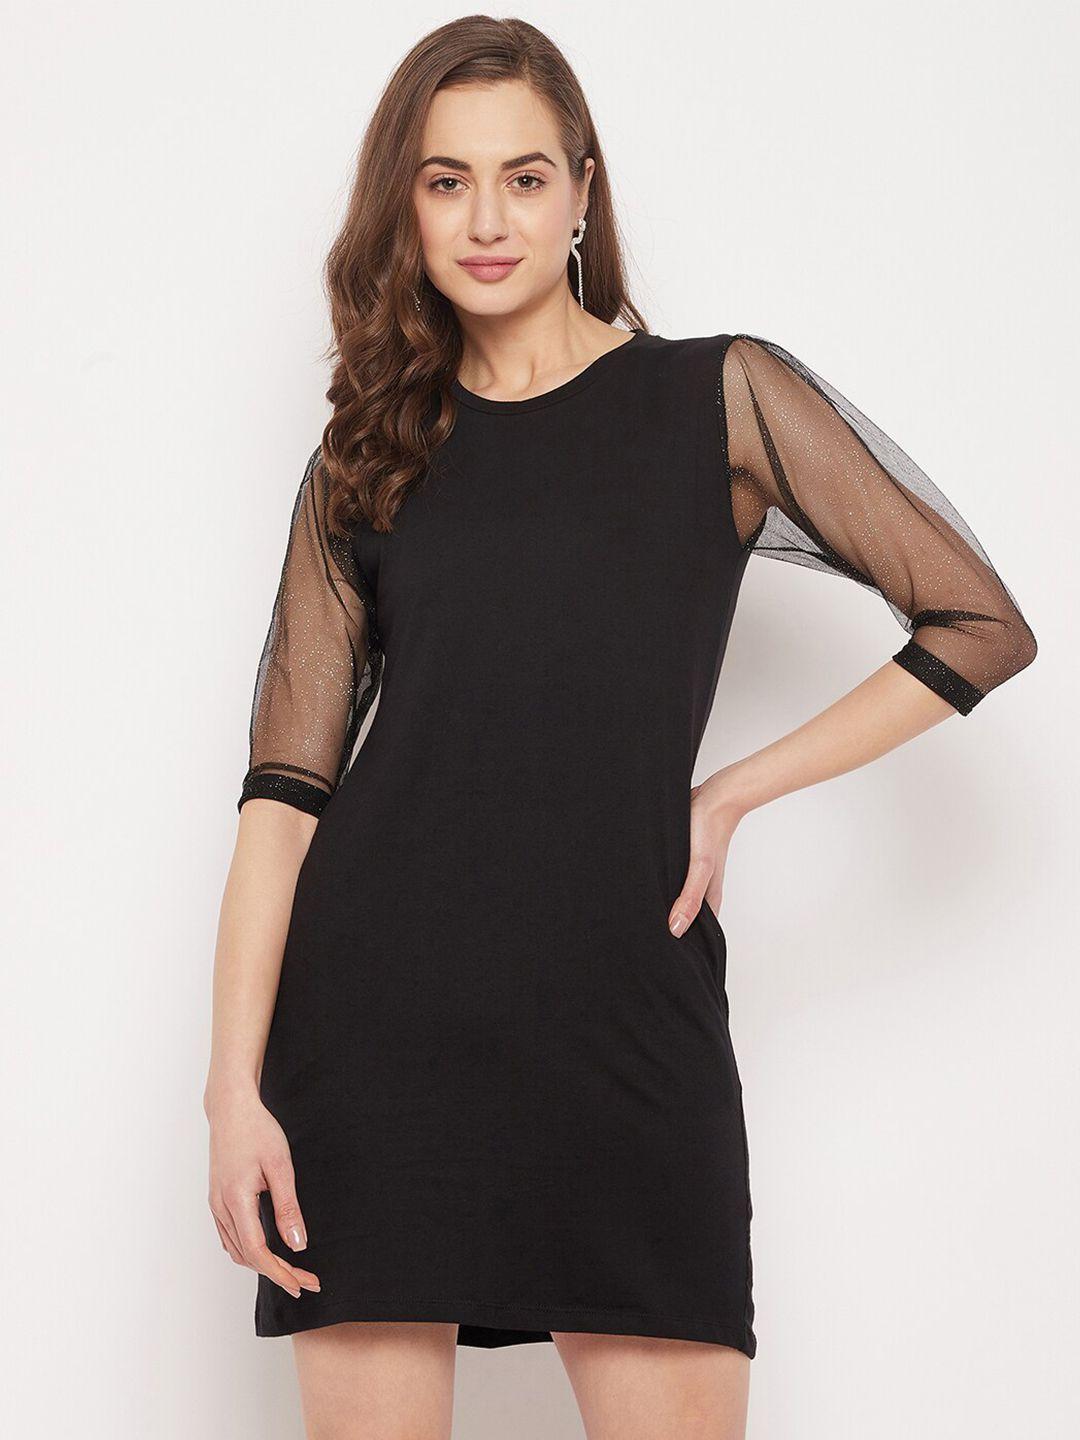 jhankhi black solid a-line dress with net sleeves